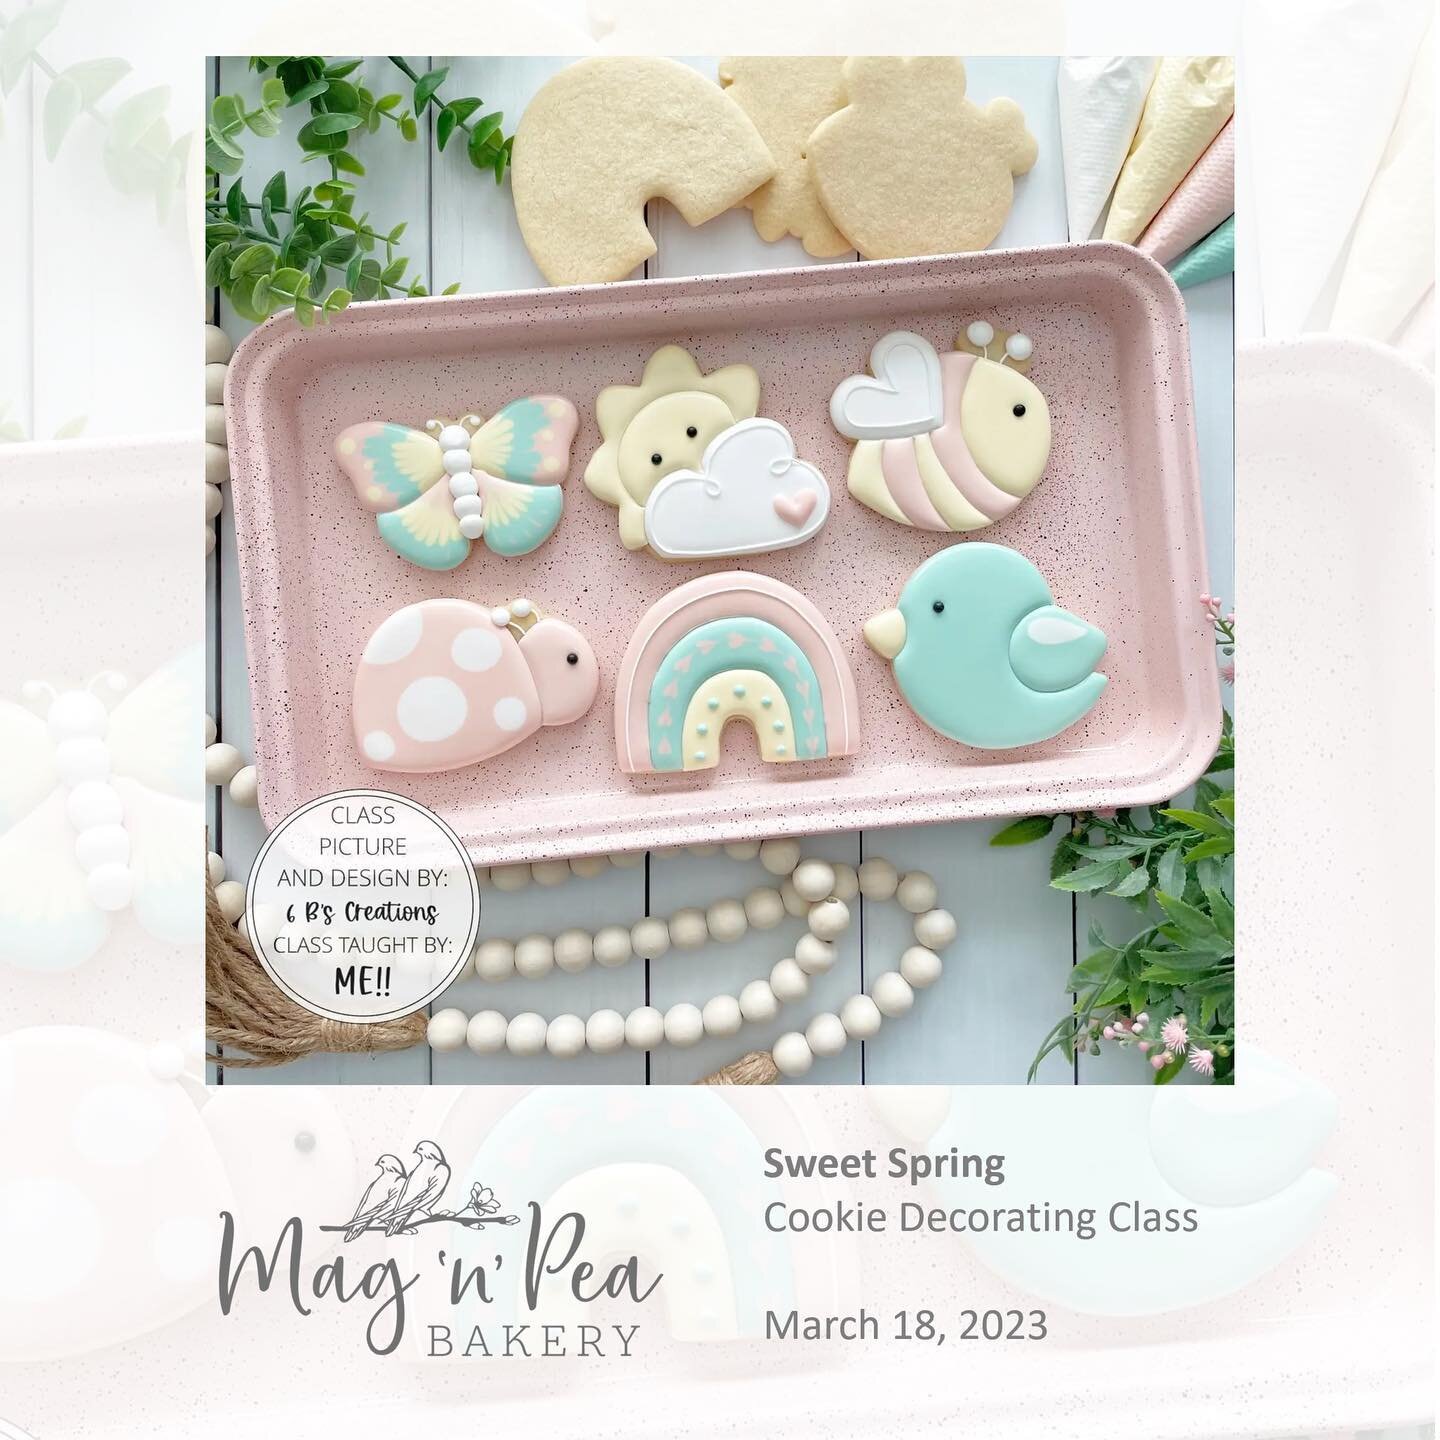 Learn how to decorate your own adorable cookies with this Sweet Spring set on SATURDAY, MARCH 18 (two class time options)

Register online
MagNPeaBakery.com/classes

These classes are perfect for beginners - no prior cookie decorating experience is n